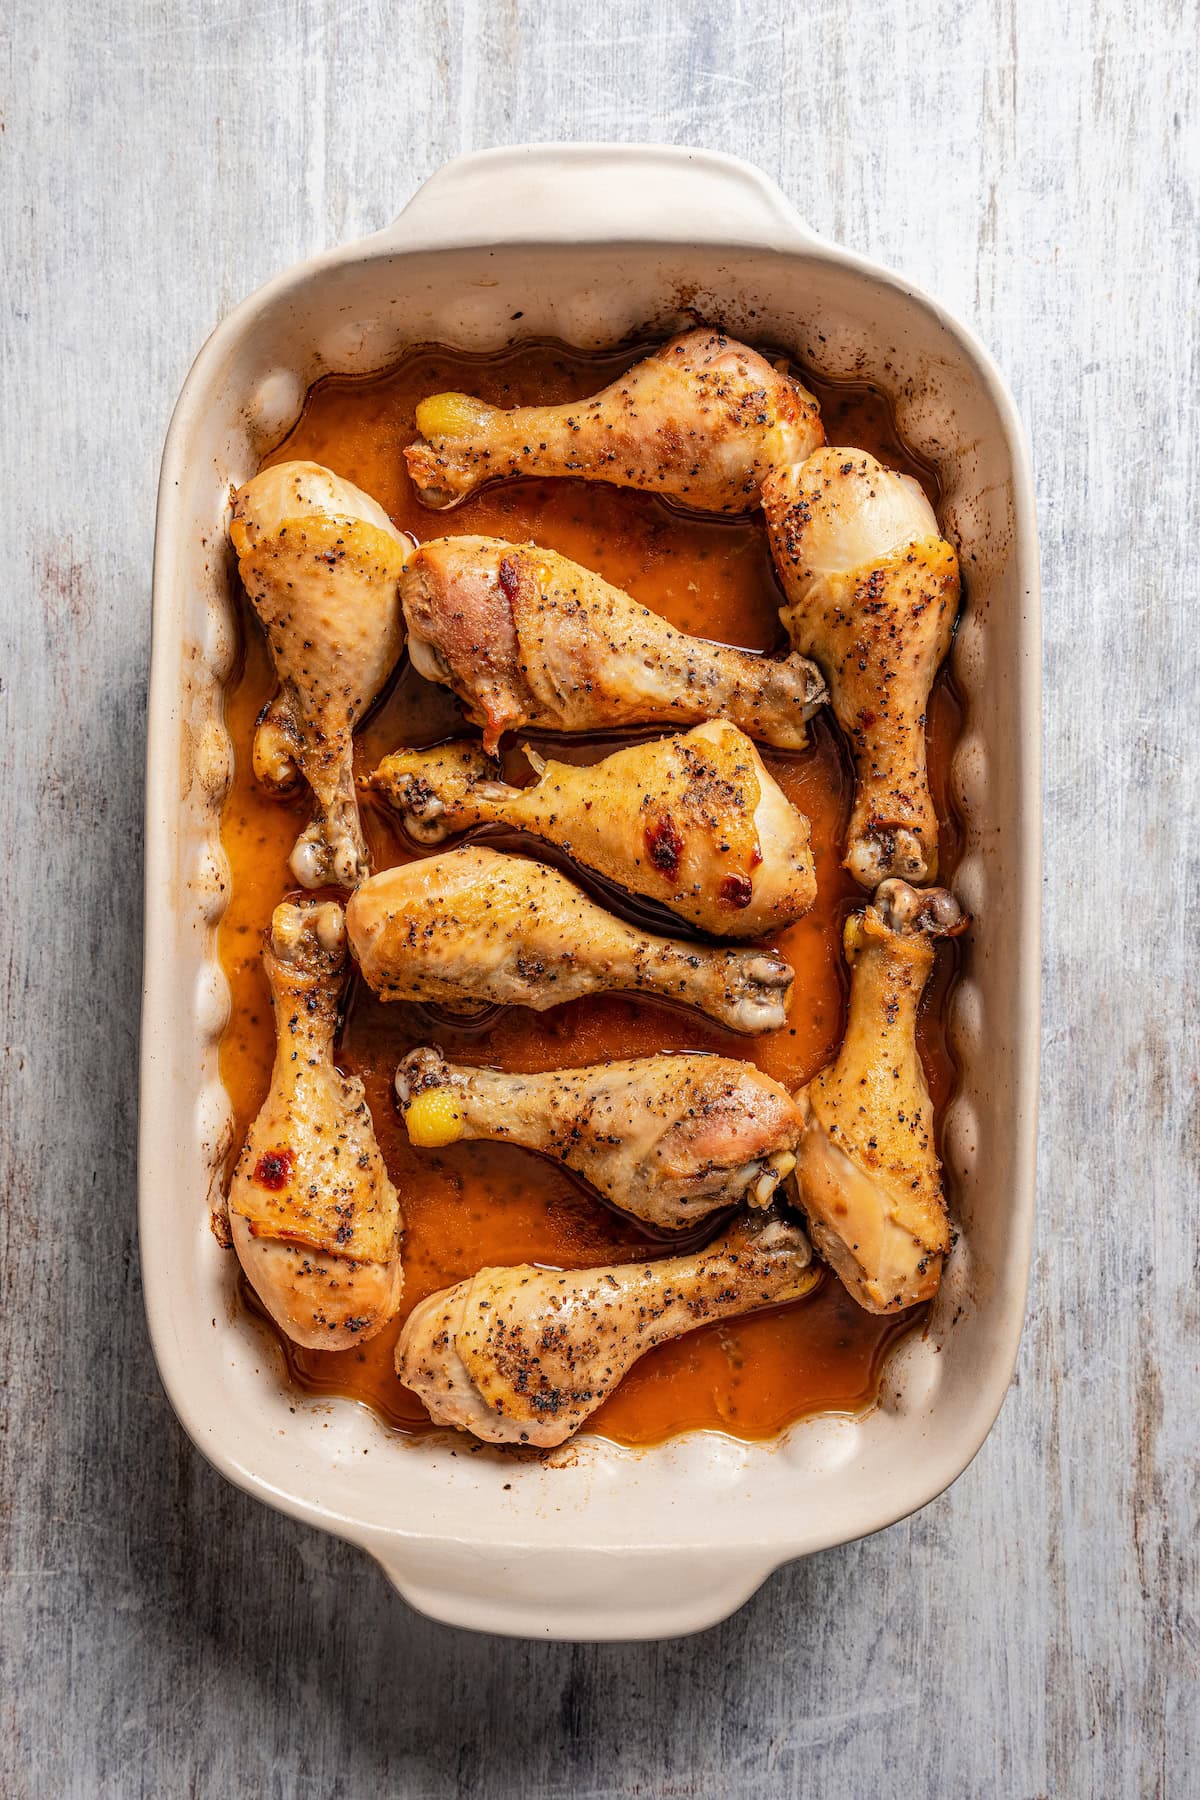 Baked honey soy chicken drumsticks in a ceramic baking dish.